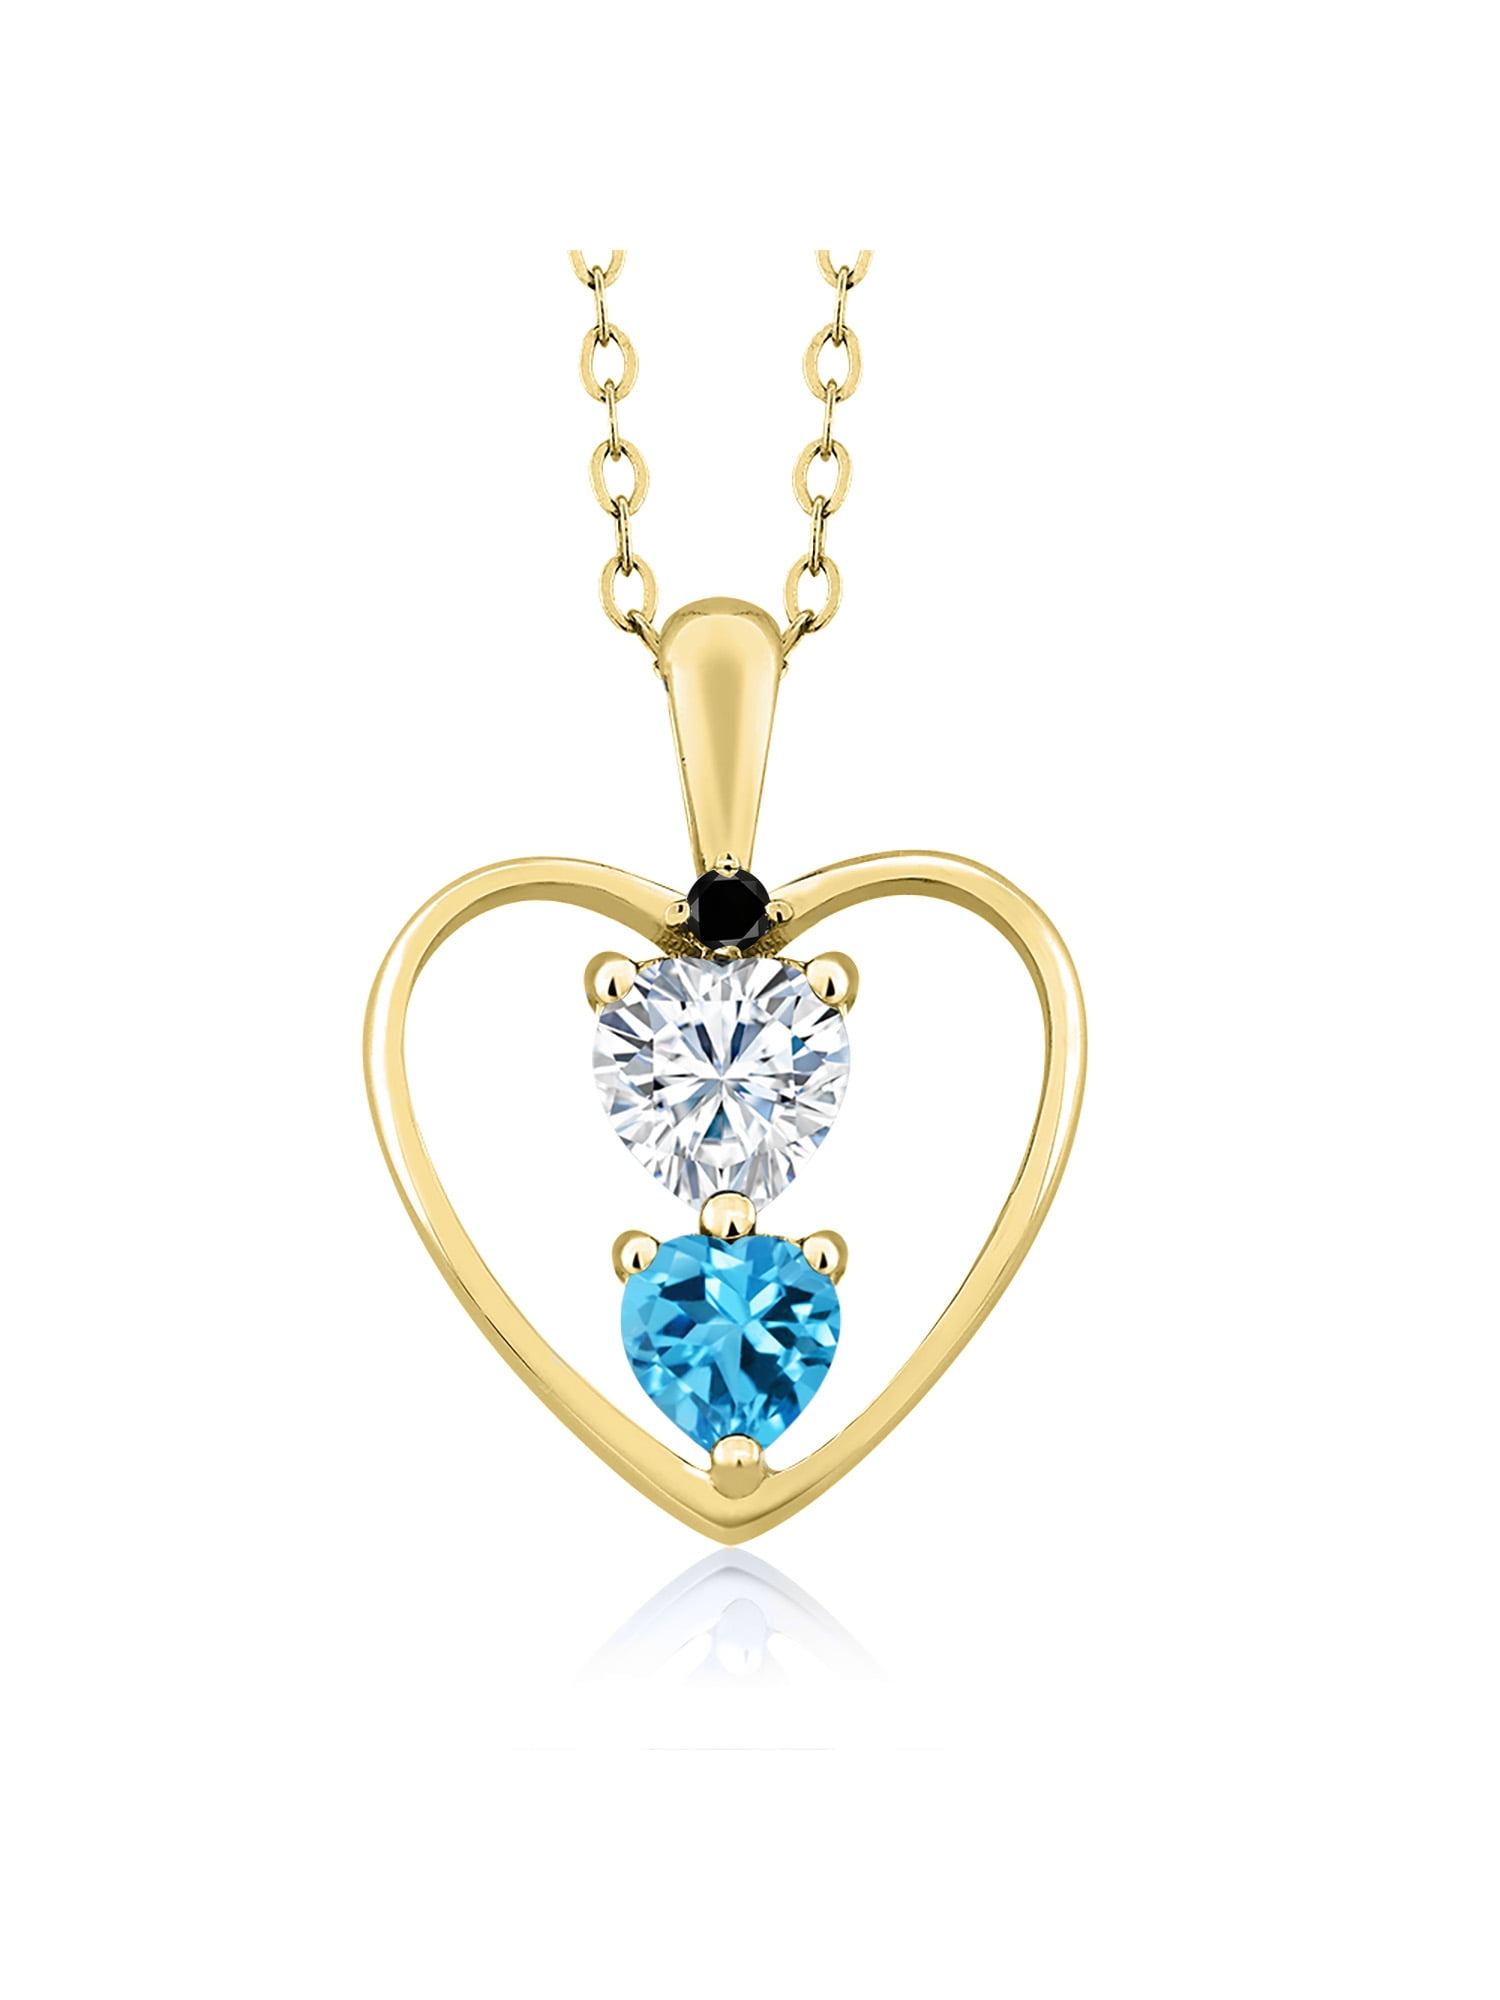 Gem Stone King - 18K Yellow Gold Plated Silver Pendant Forever Classic ...